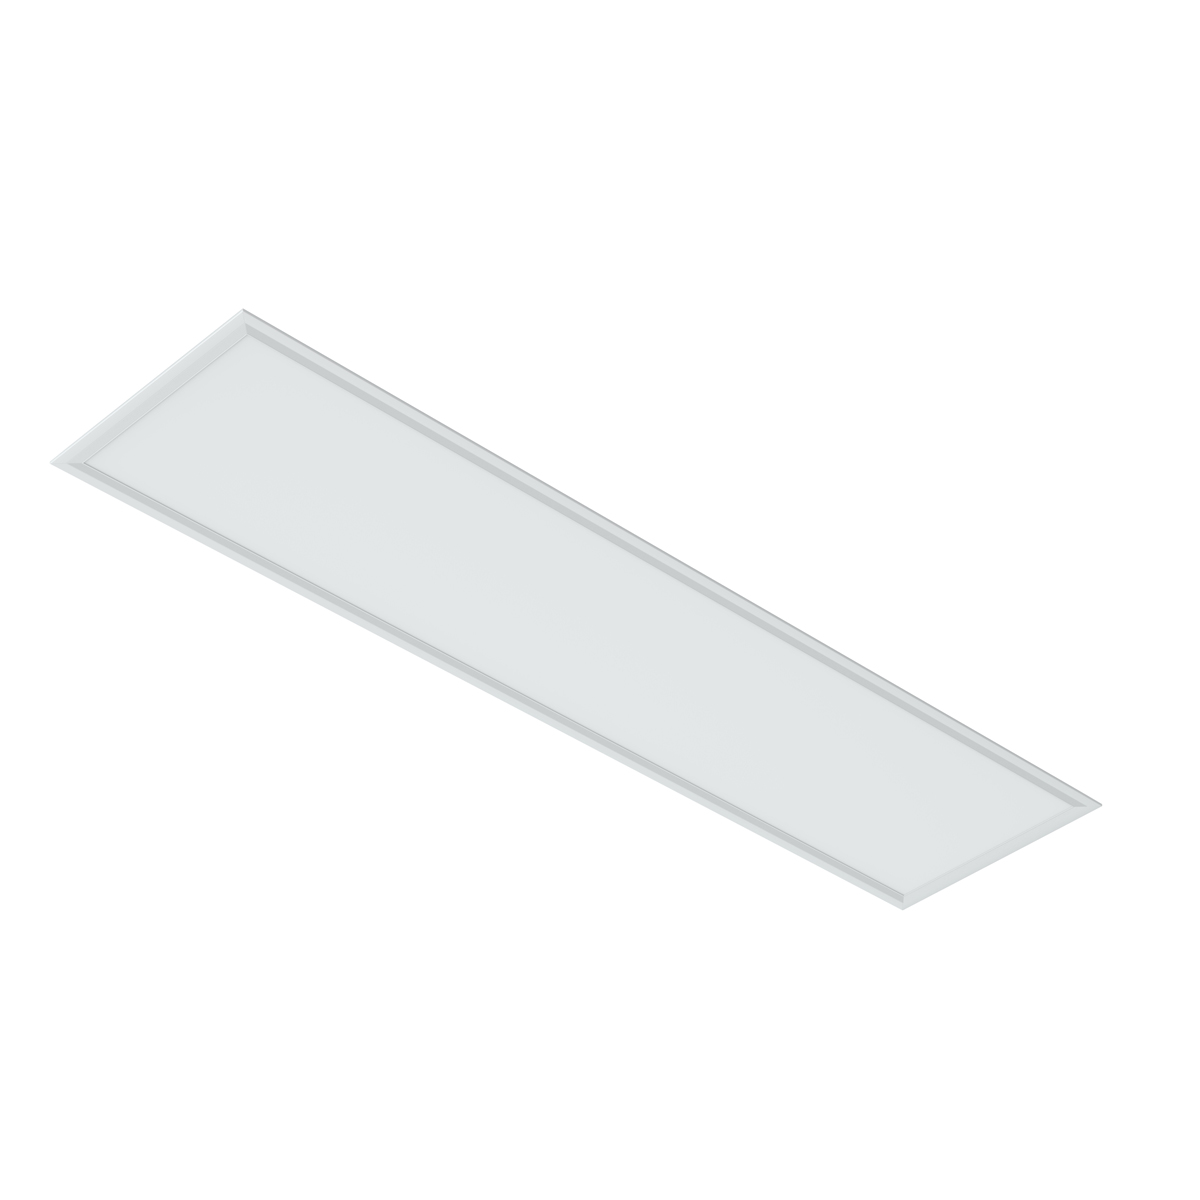 View 1200 x 300mm LED Panel Light TPa Diffuser Cool White information